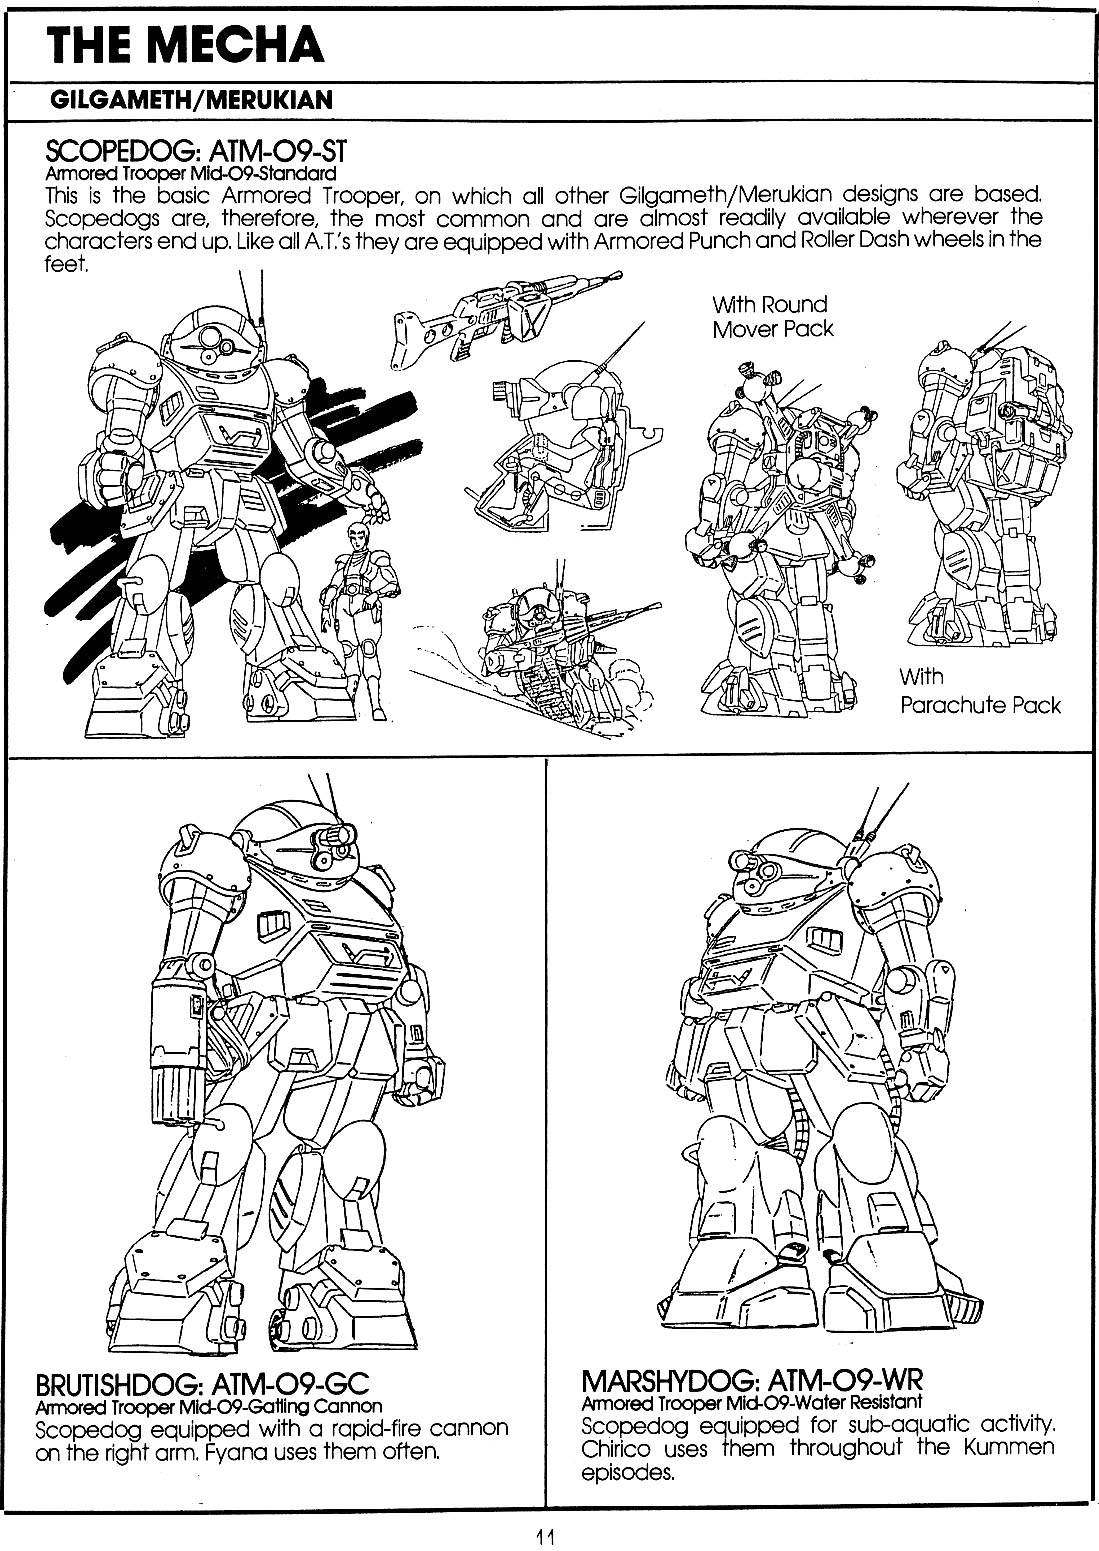 VOTOMS Viewing Guide 12